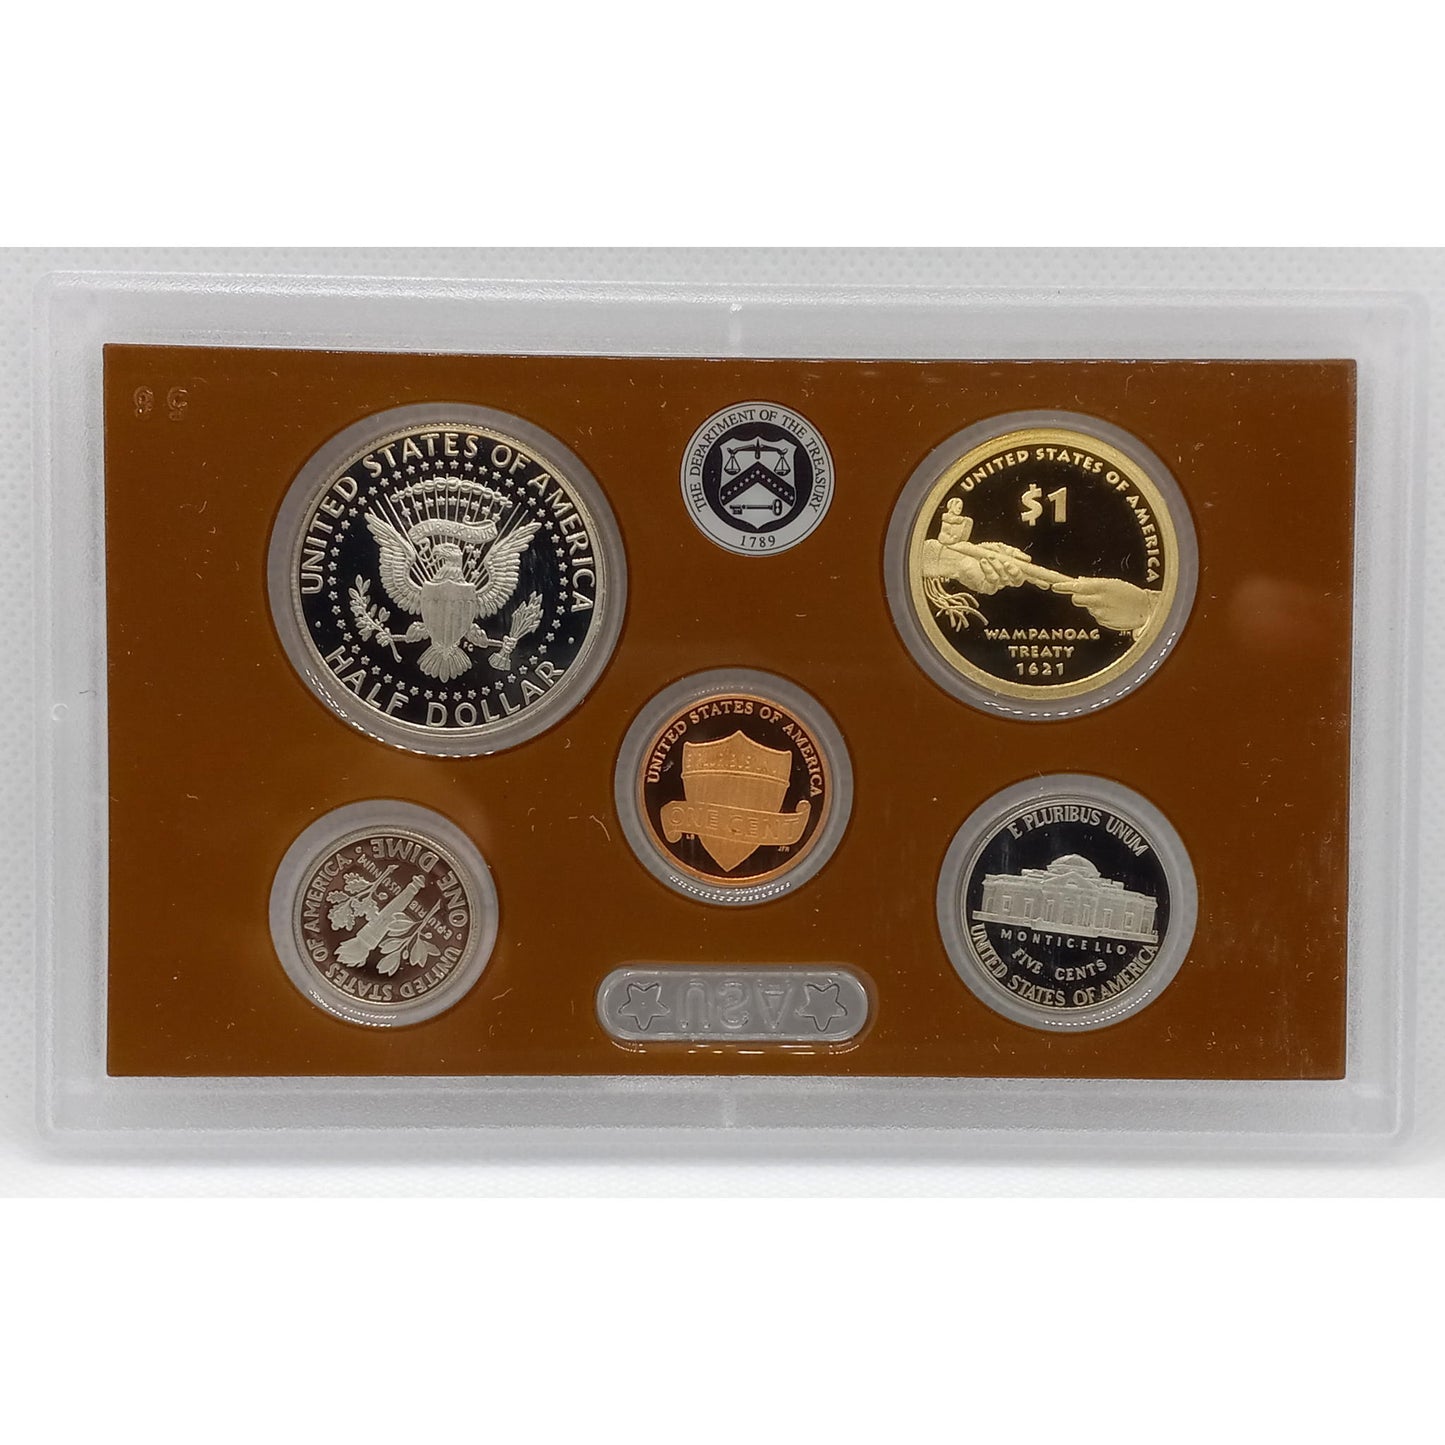 2011 United States Mint PROOF SET ( CLAD ) With OGP & COA! Rotated Coins!!!